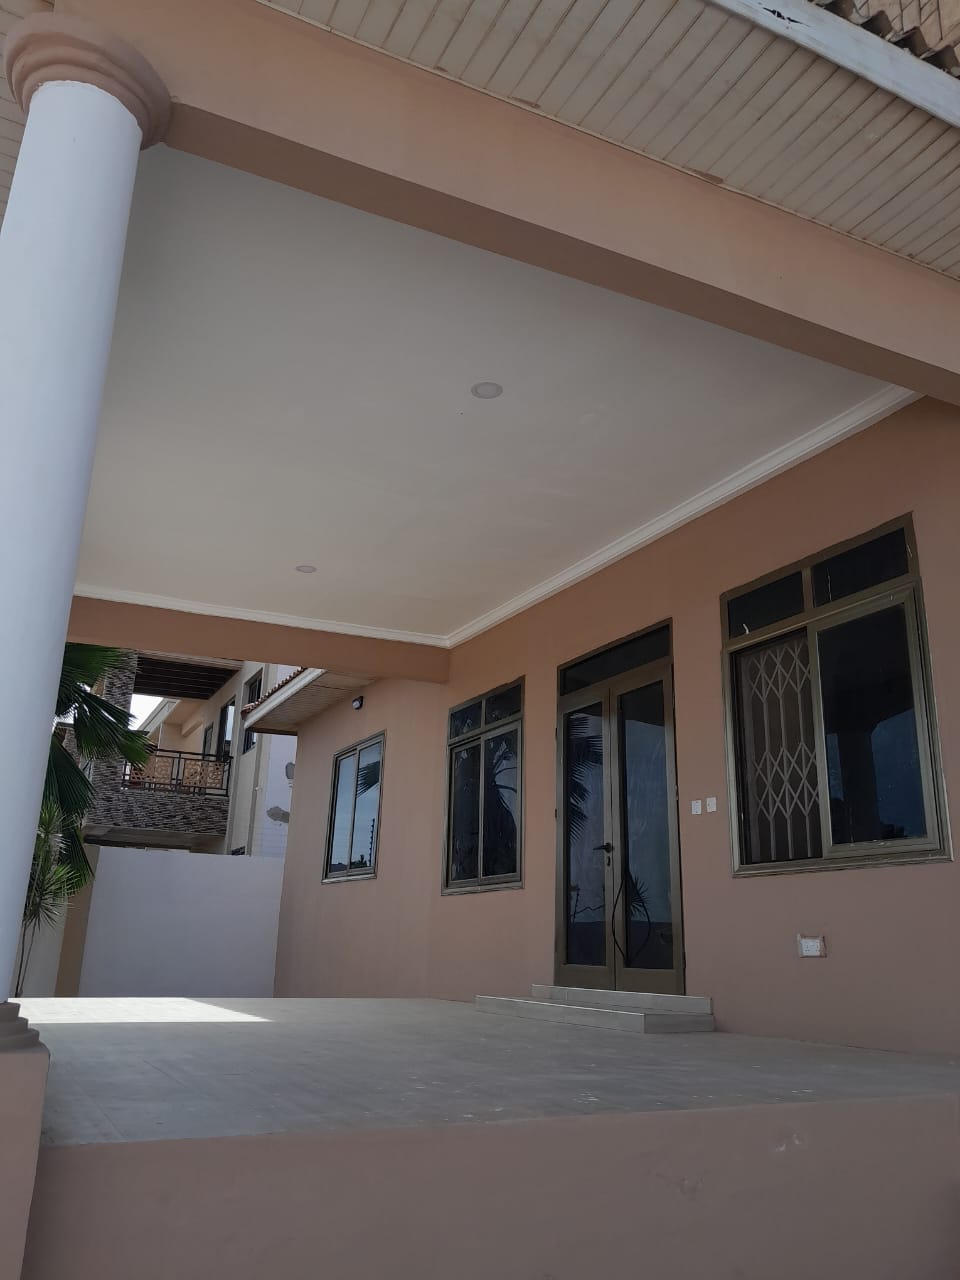 Executive Five 5-Bedroom House for Sale in Pokuase